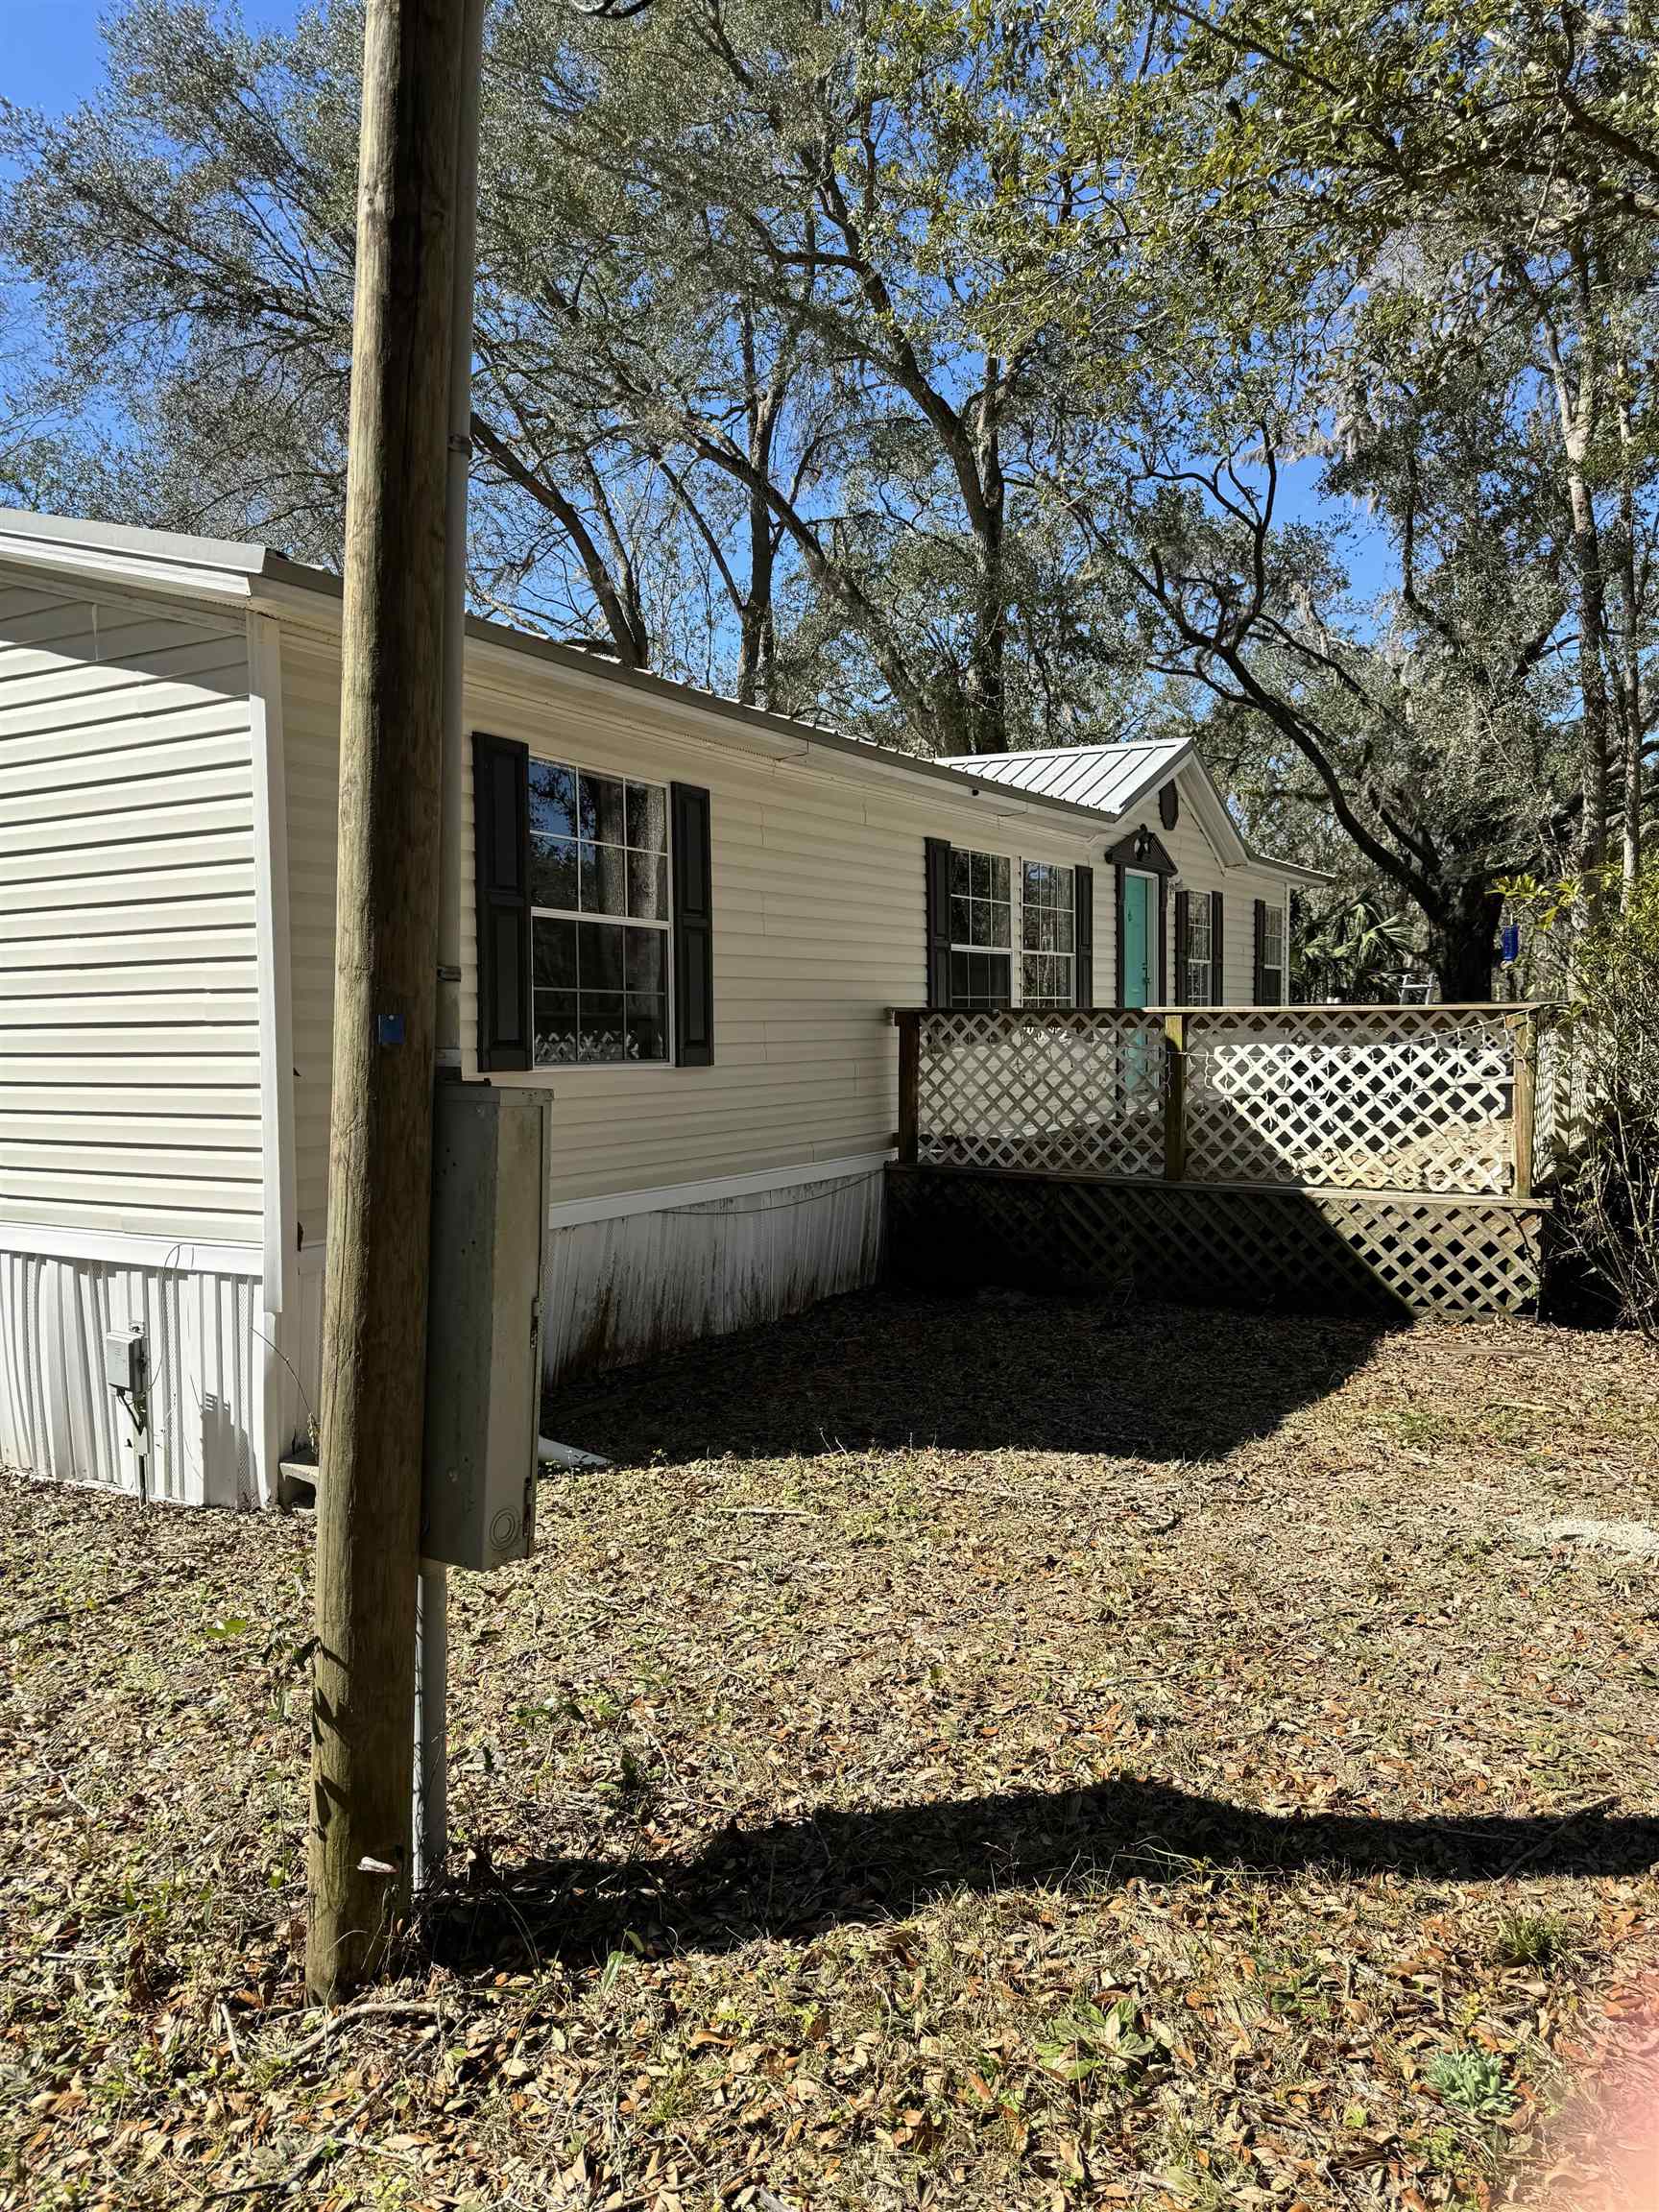 3531 Whipporwill Way,PERRY,Florida 32347,3 Bedrooms Bedrooms,2 BathroomsBathrooms,Manuf/mobile home,3531 Whipporwill Way,368221